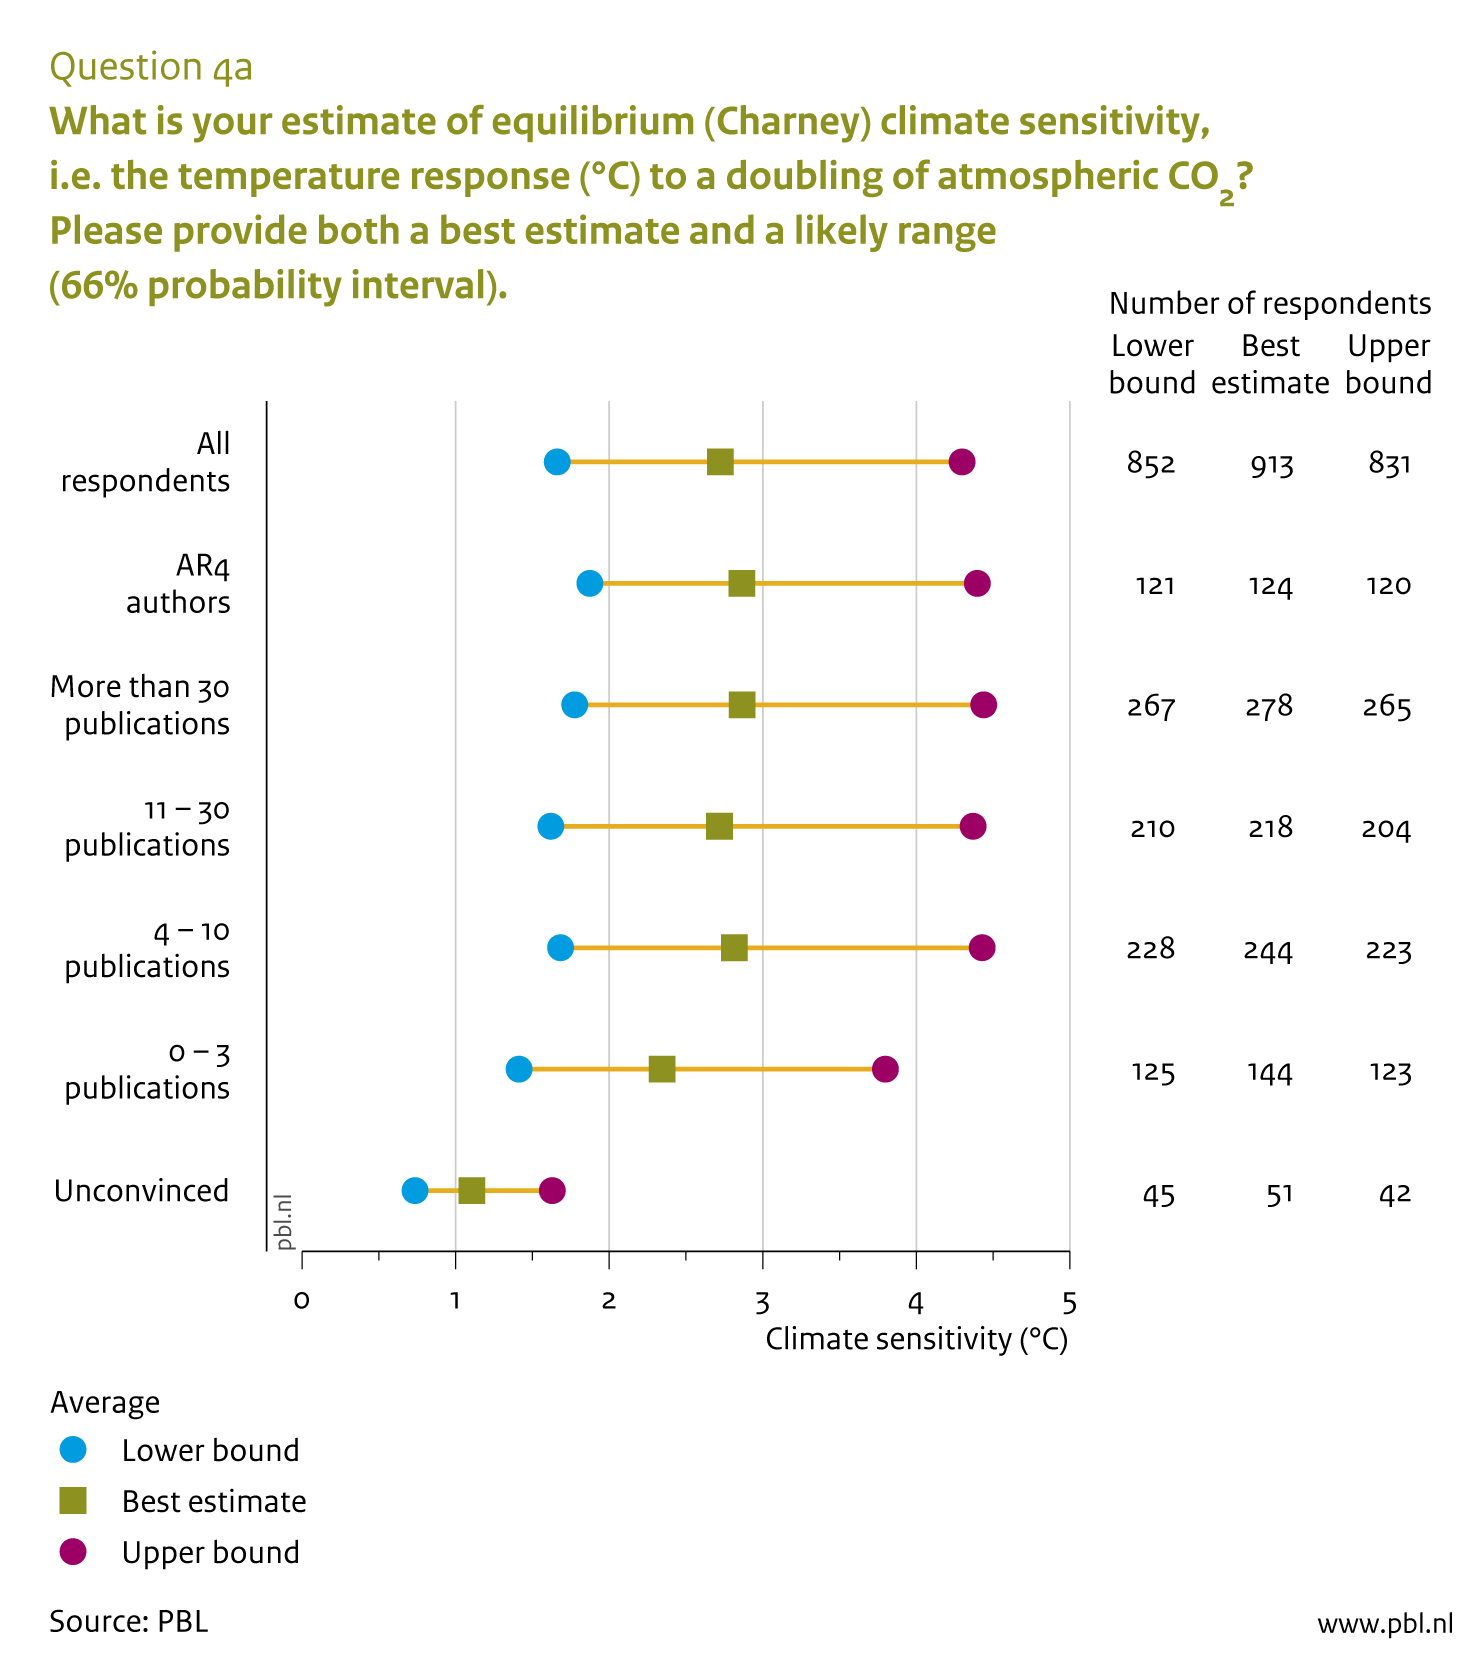 Average estimates of the Equilibrium Climate Sensitivity (ECS) and its likely range from seven groups of respondents, including authors of the Working Group I report of the fourth IPCC Assesment Report (AR4), respondents who signed public declarations critical of mainstream climate science as embodied by IPCC (‘unconvinced’), and four different subgroups distinguished according to their self-declared number of climate related peer-reviewed publications (0–3; 4–10; 11–30; more than 30).